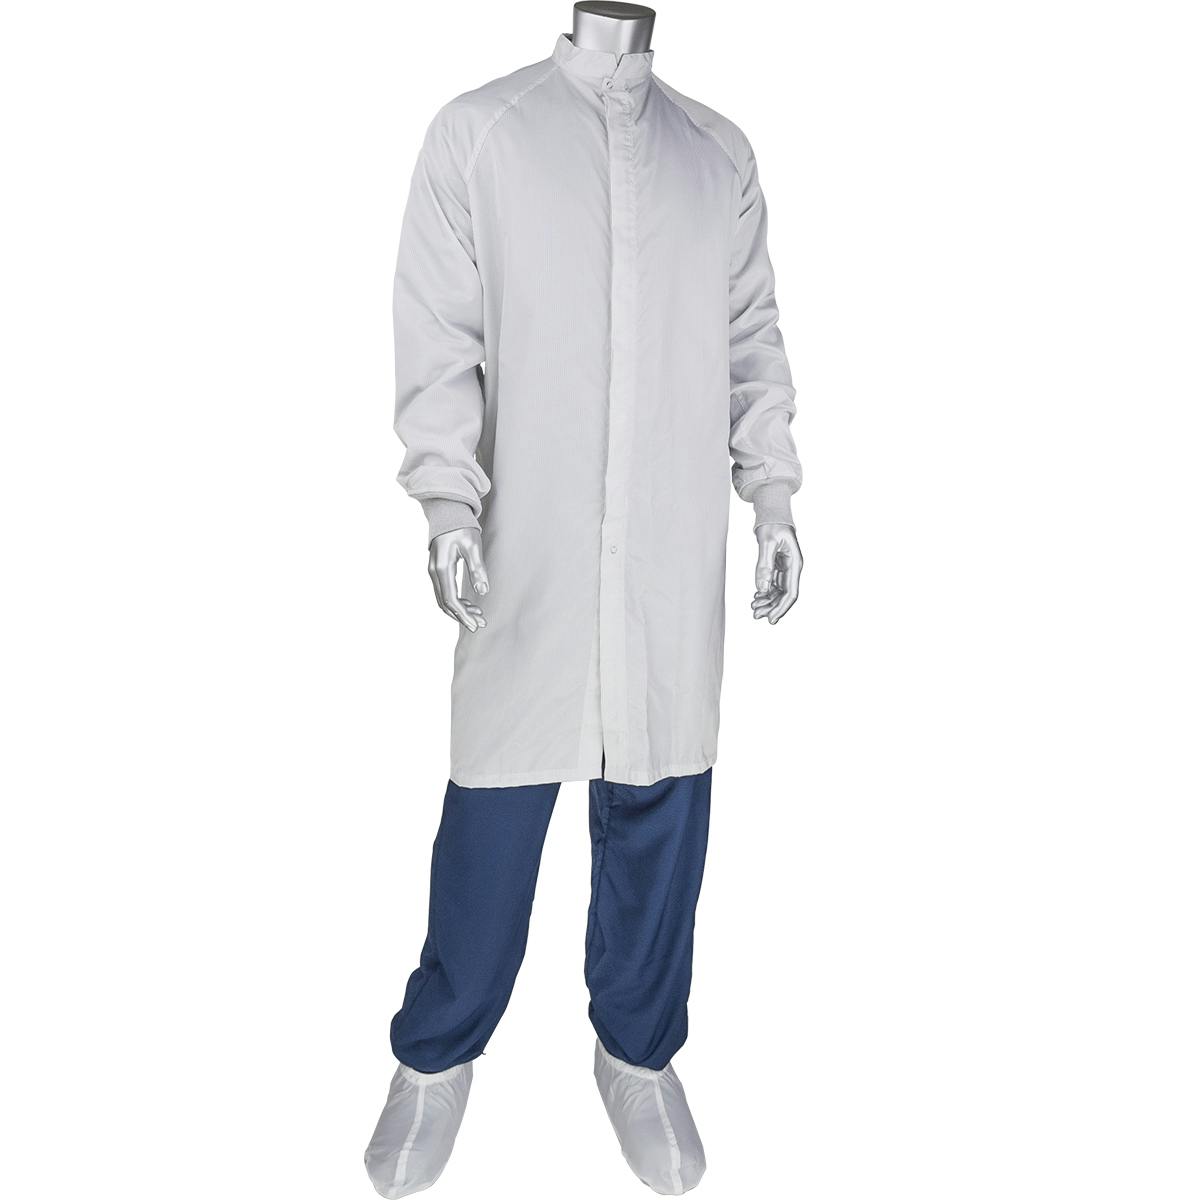 Disctek 2.5 Grid ISO 4 (Class 10) Cleanroom Frock, White (CFRZC-89WH)